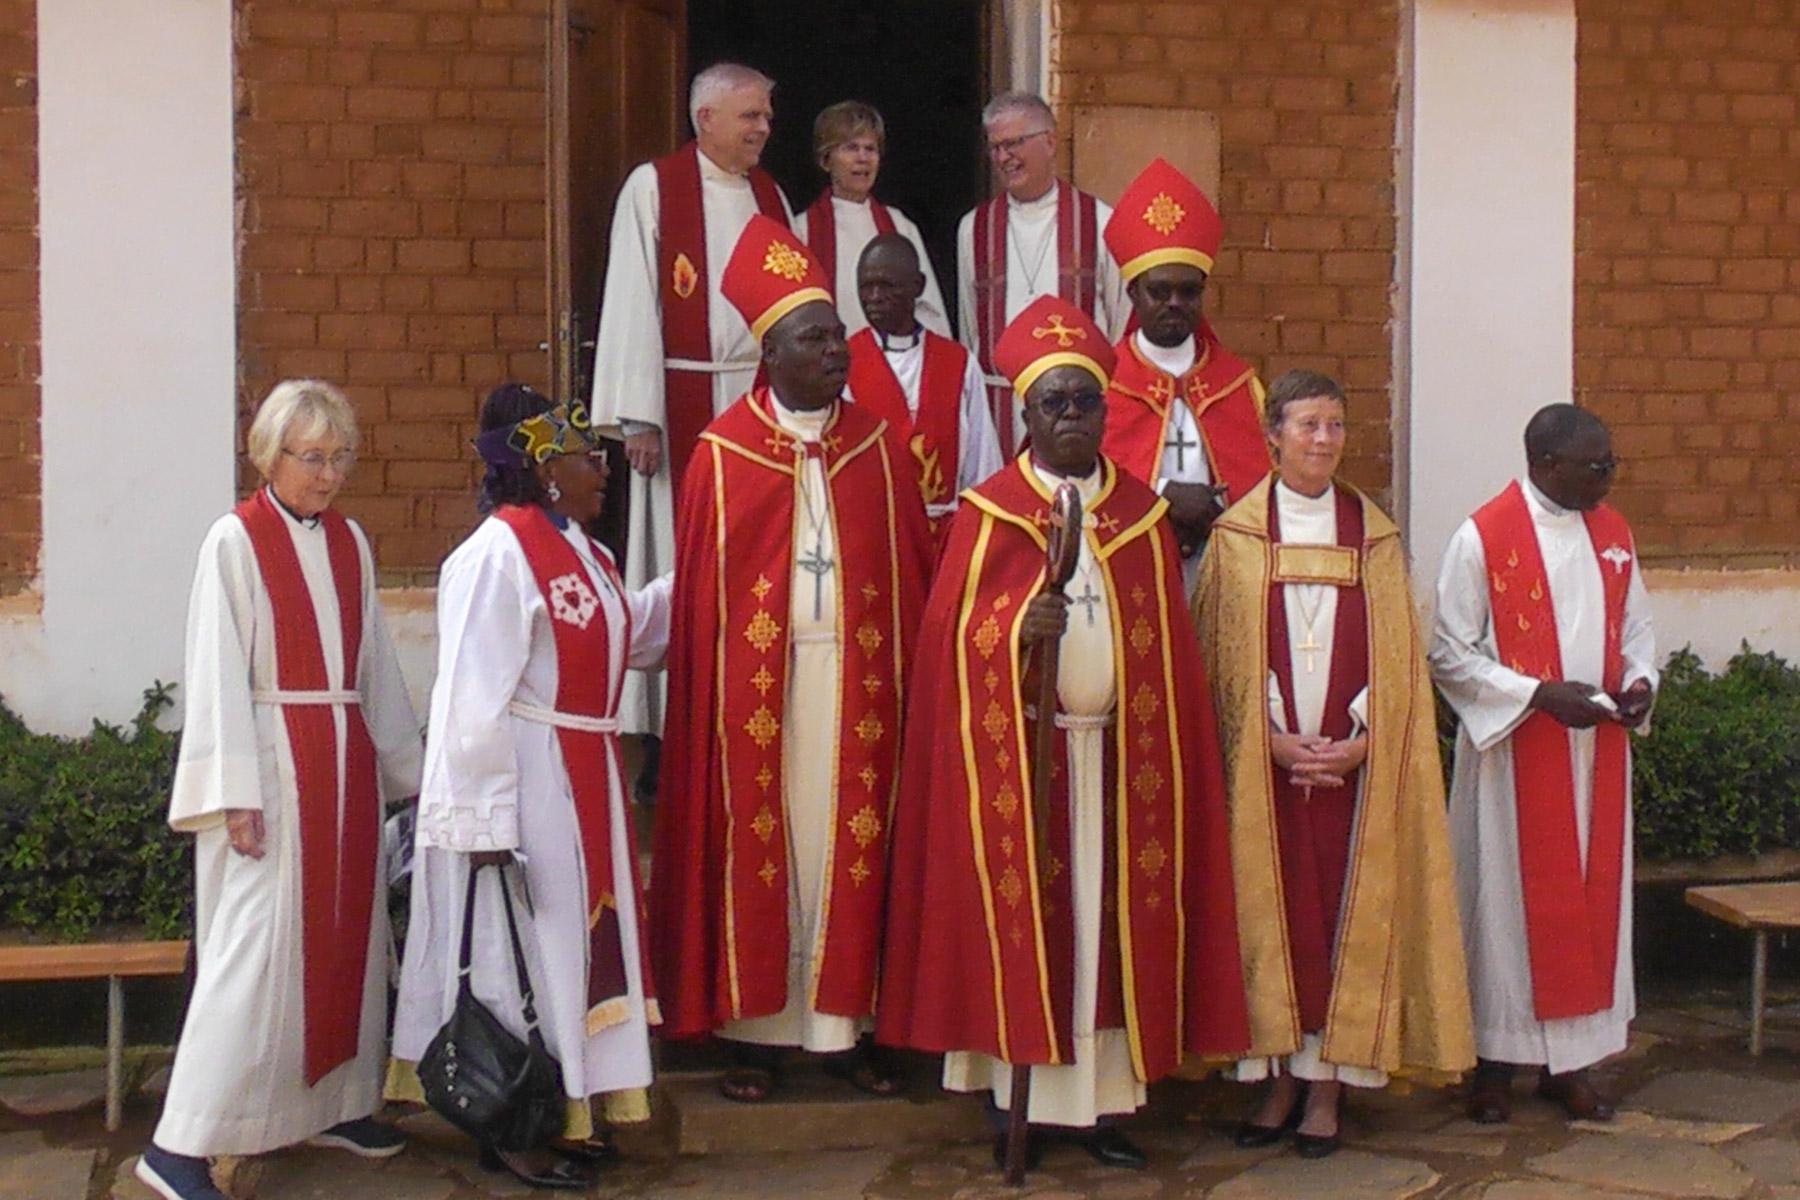 The National Bishop of the Evangelical Lutheran Church in Cameroon (EELC), Rev. Dr. Jean Baiguélé, together with local and international bishops and pastors after the worship service on the church’s centenary celebrations. Photo: EELC